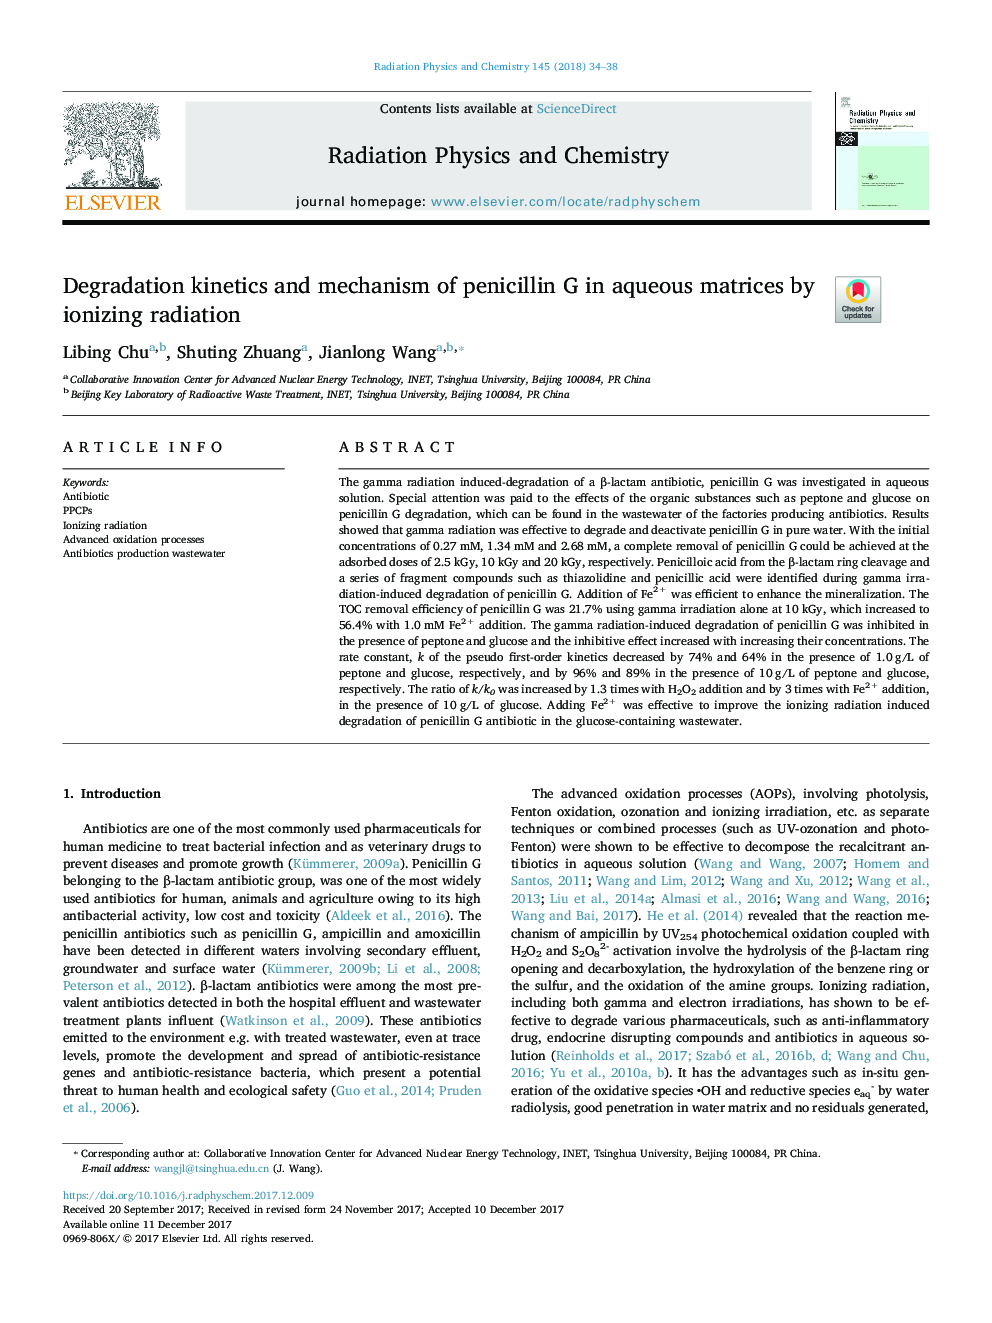 Degradation kinetics and mechanism of penicillin G in aqueous matrices by ionizing radiation